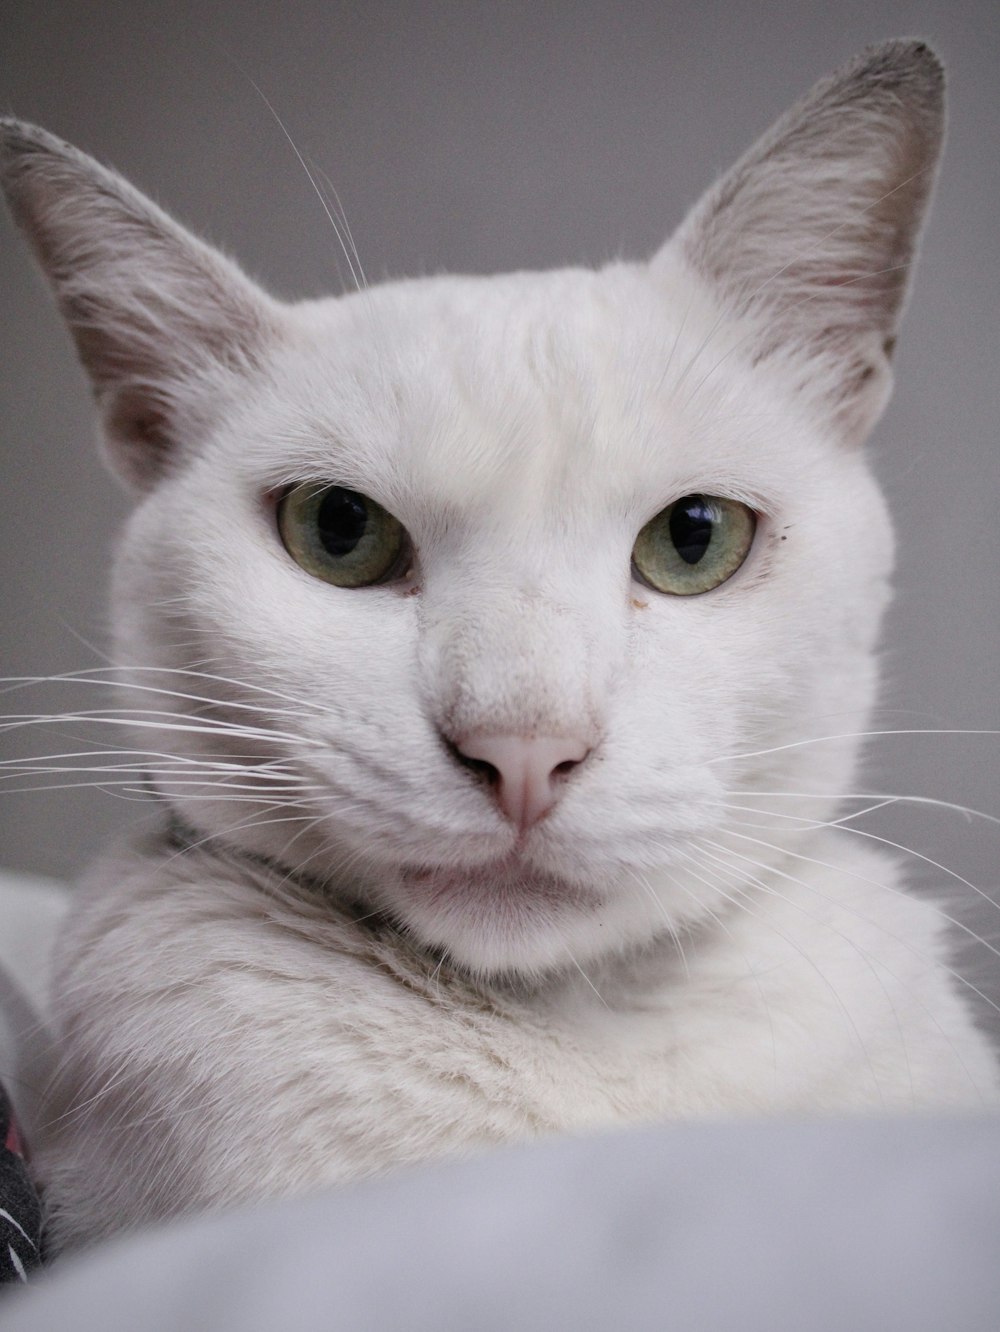 a close up of a white cat with green eyes